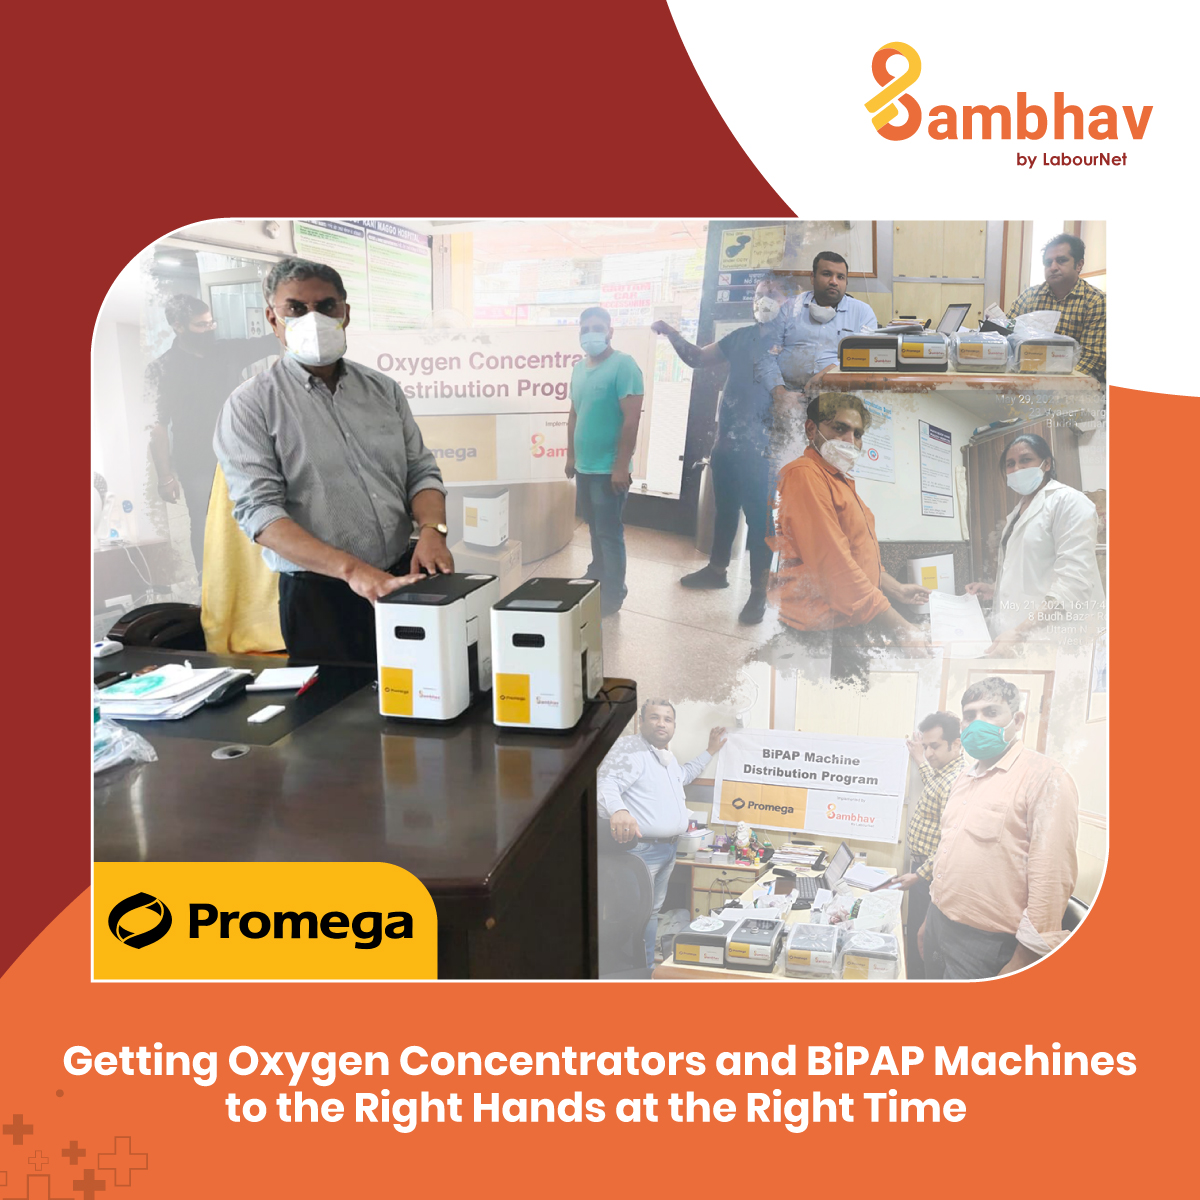 Saving one life at a time, our efforts to help hospitals and COVID-care centers access and utilize oxygen concentrators and BiPAP machines continue. 

@promega @labournet 

#india #savelives #comeforward #livelihoods #covidrelief #healthcare #oxygenforall #promega